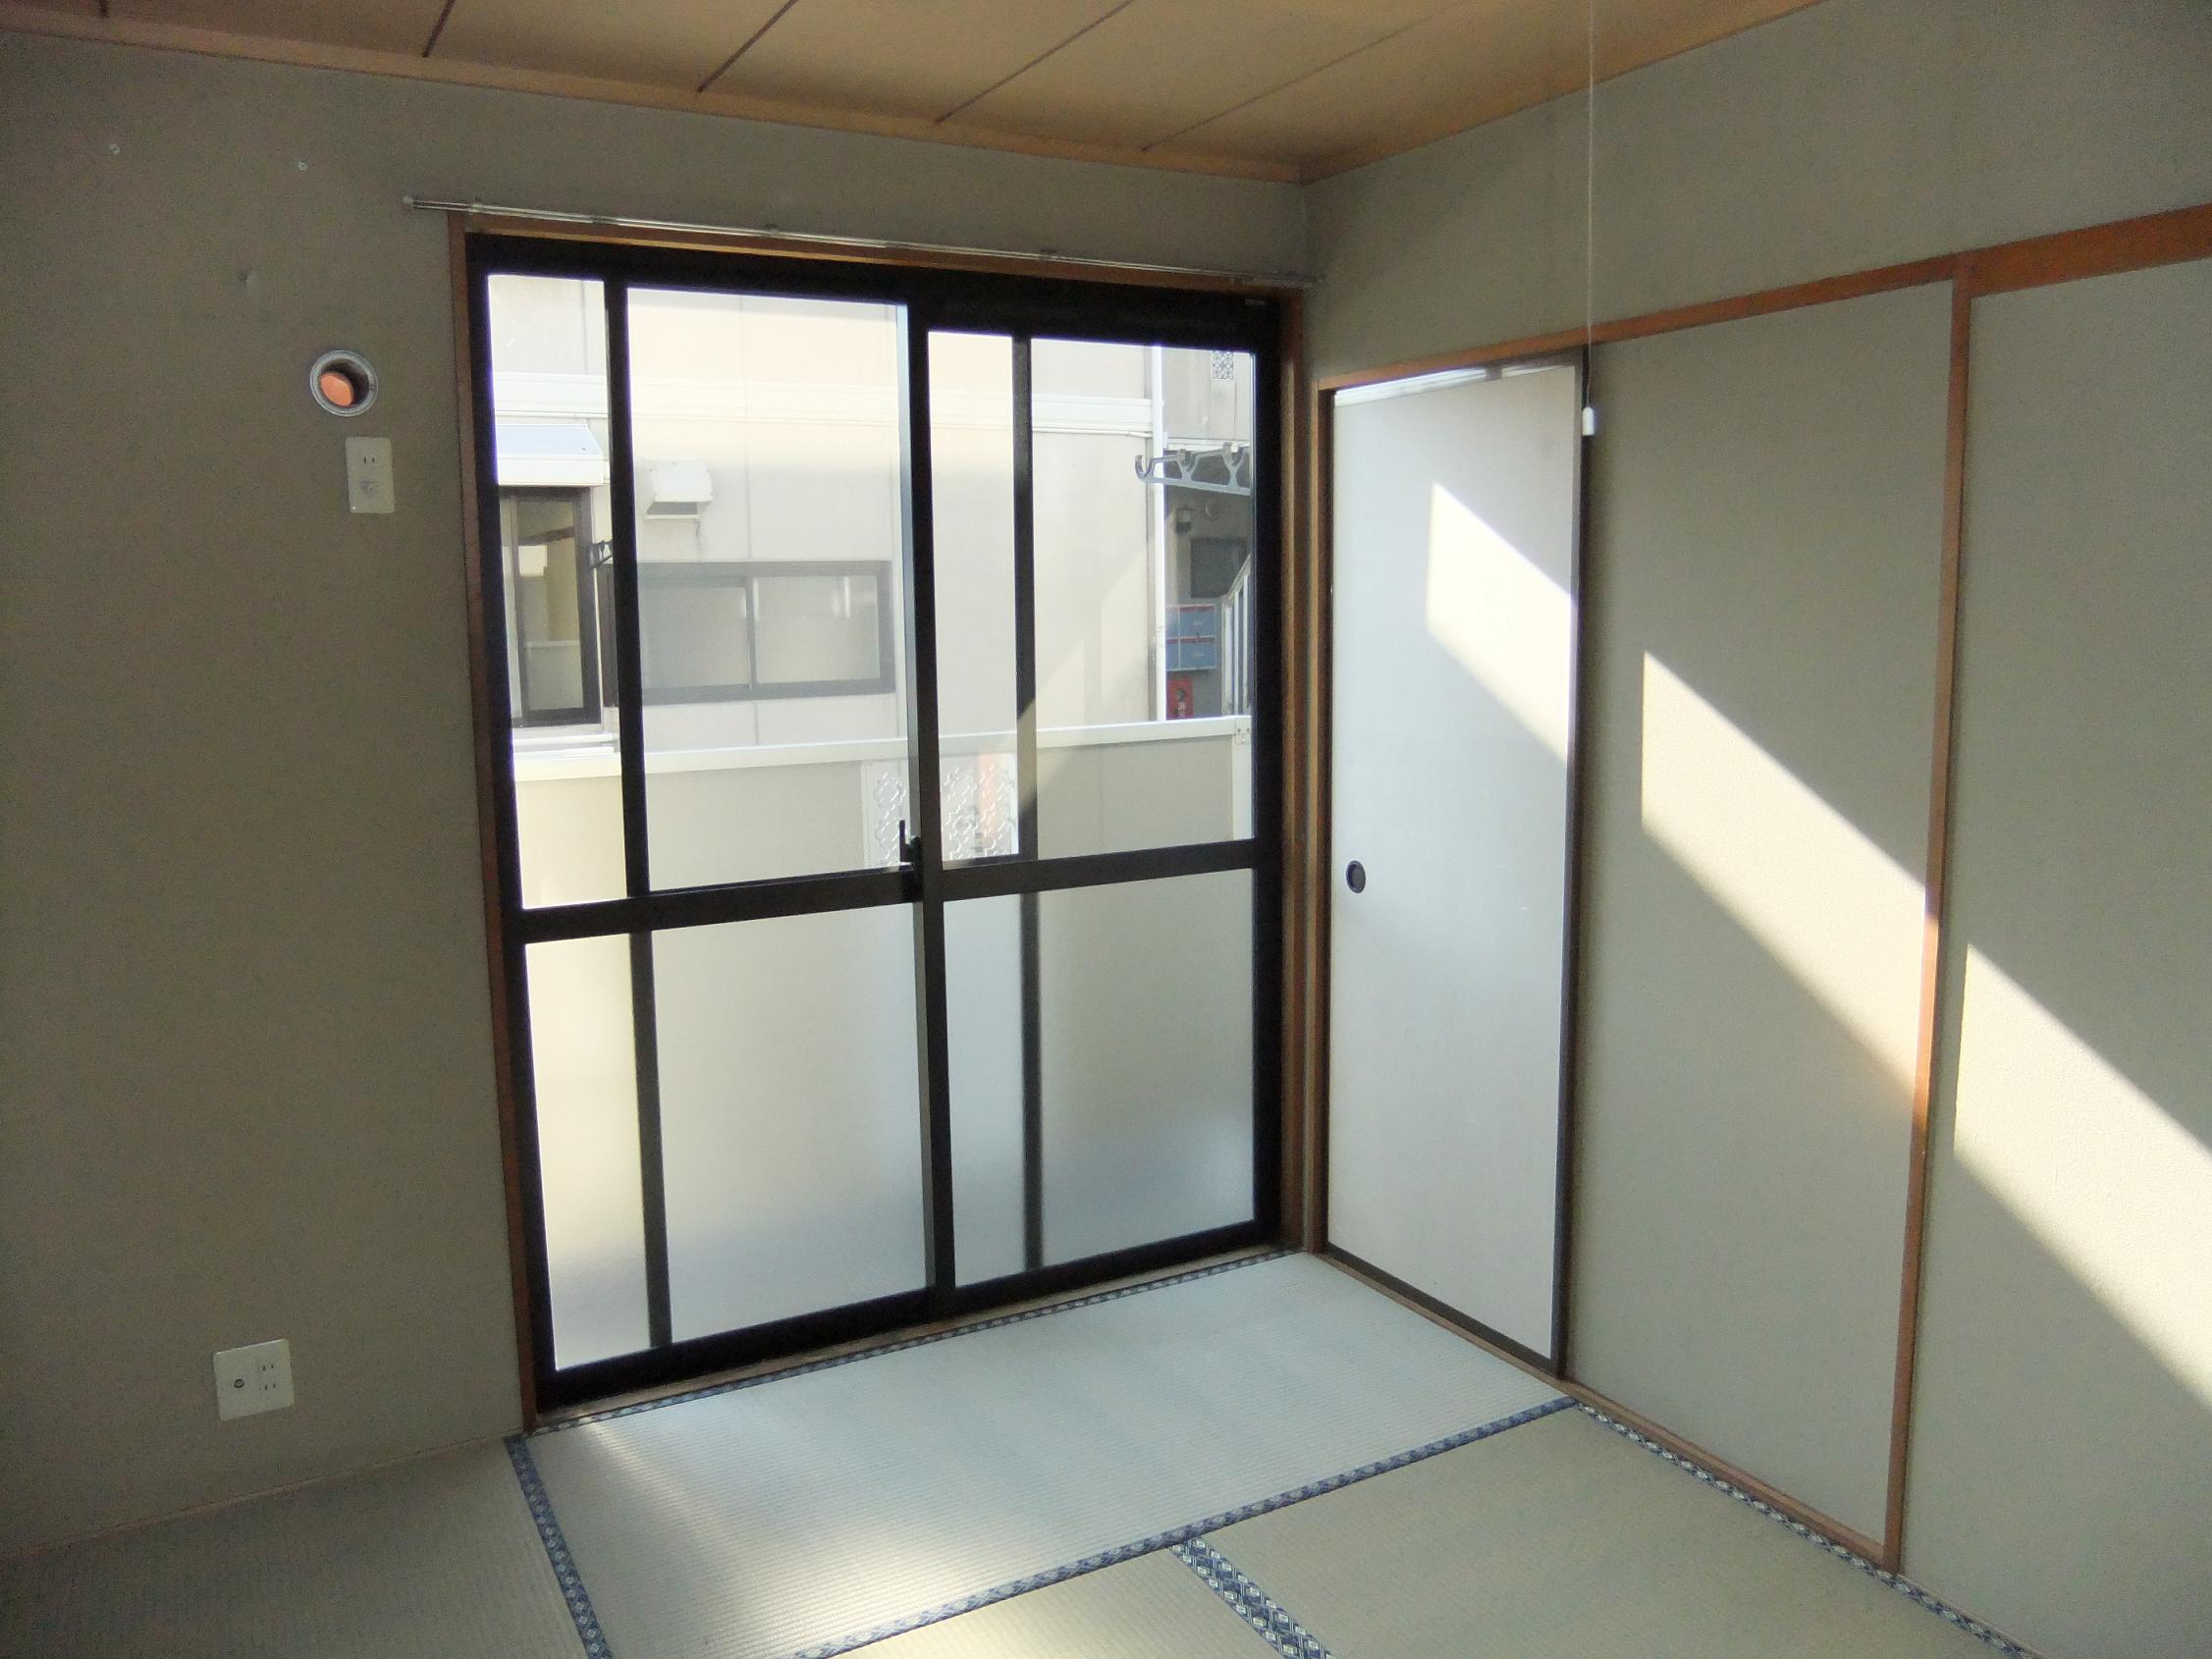 Living and room. It is the south side of the Japanese-style room